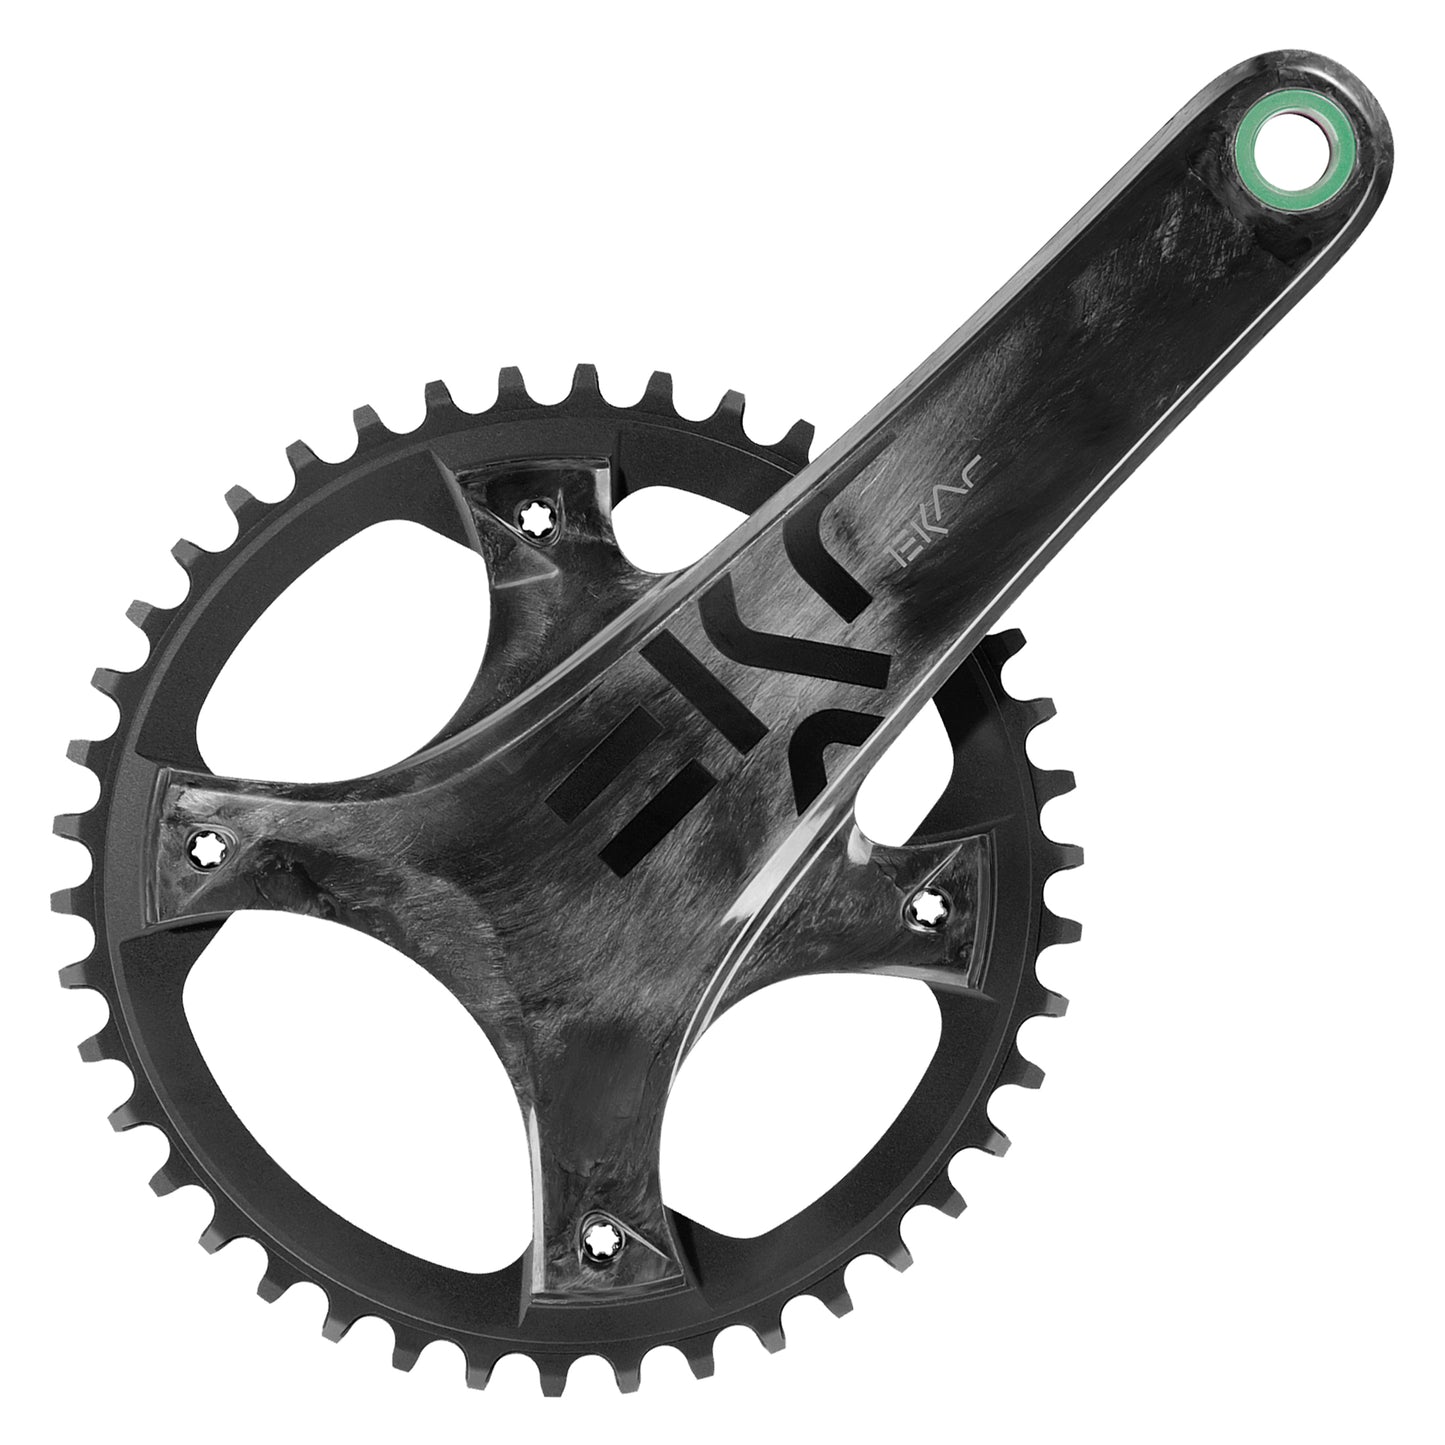 Campagnolo EKAR Crankset - 172.5mm, 13-Speed, 42t, 123mm BCD, Campagnolo Ultra-Torque Spindle Interface, Carbon